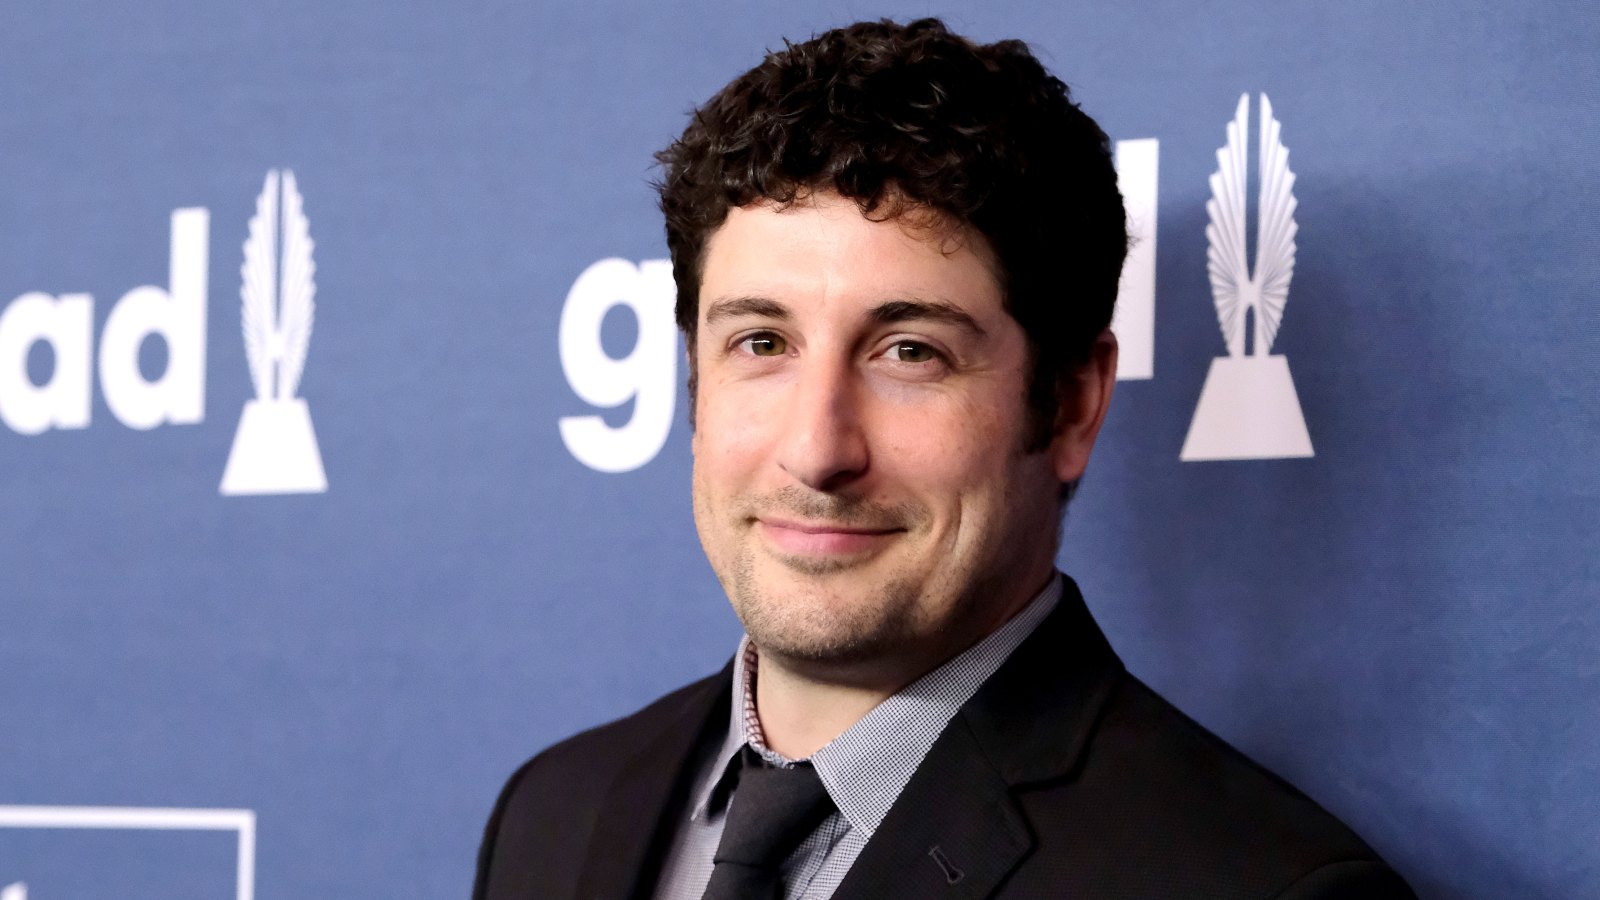 How Jason Biggs' 5-Year-Old Son Reacted to Seeing Him in 'American Pie': He Was 'Captivated'